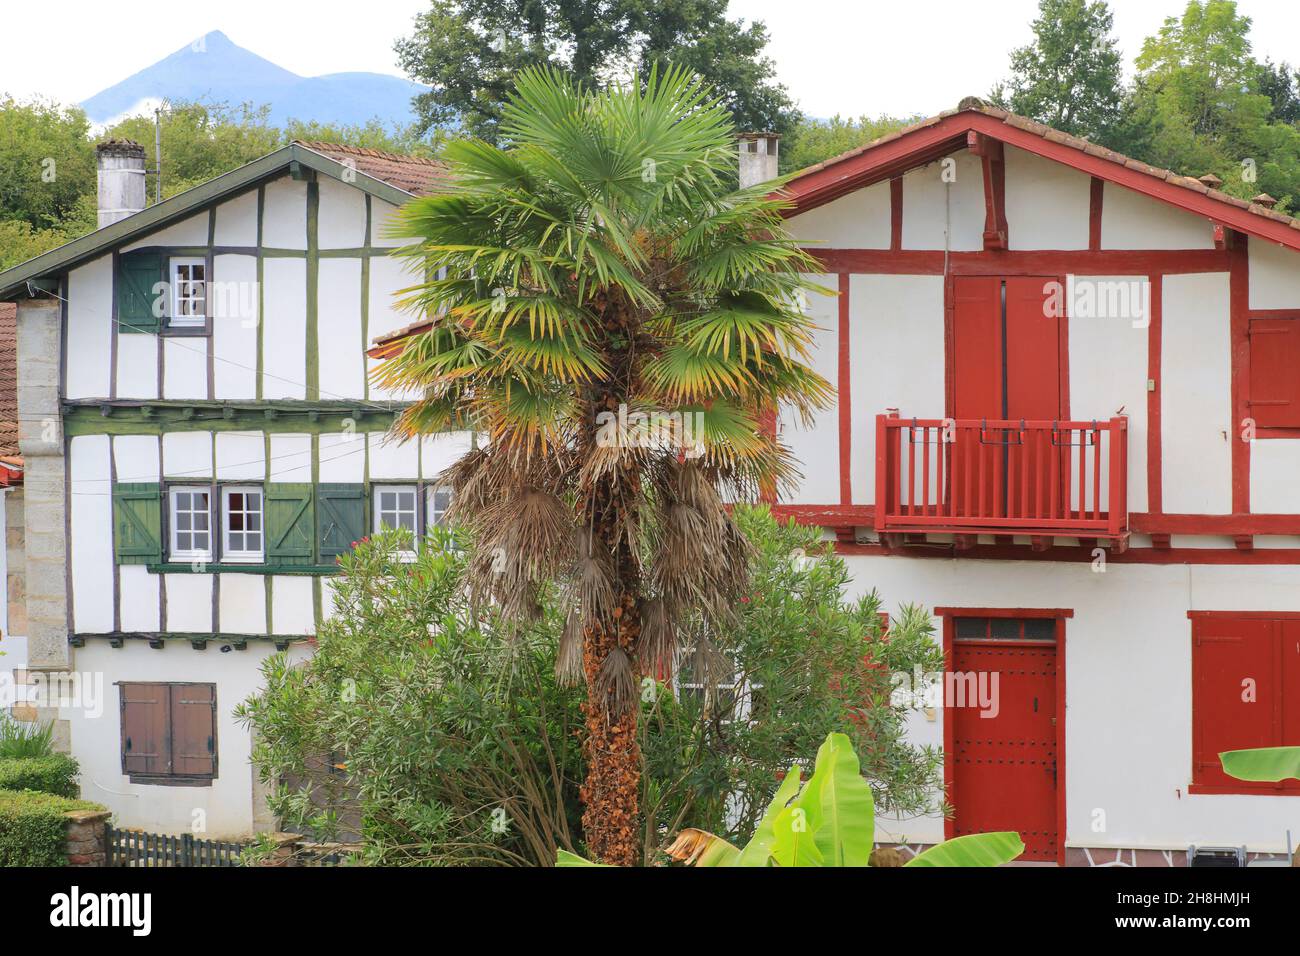 France, Pyrenees Atlantiques, Basque Country, Ainhoa (labeled The most beautiful villages of France), Labourdine houses and a palm tree with visible timber frames Stock Photo